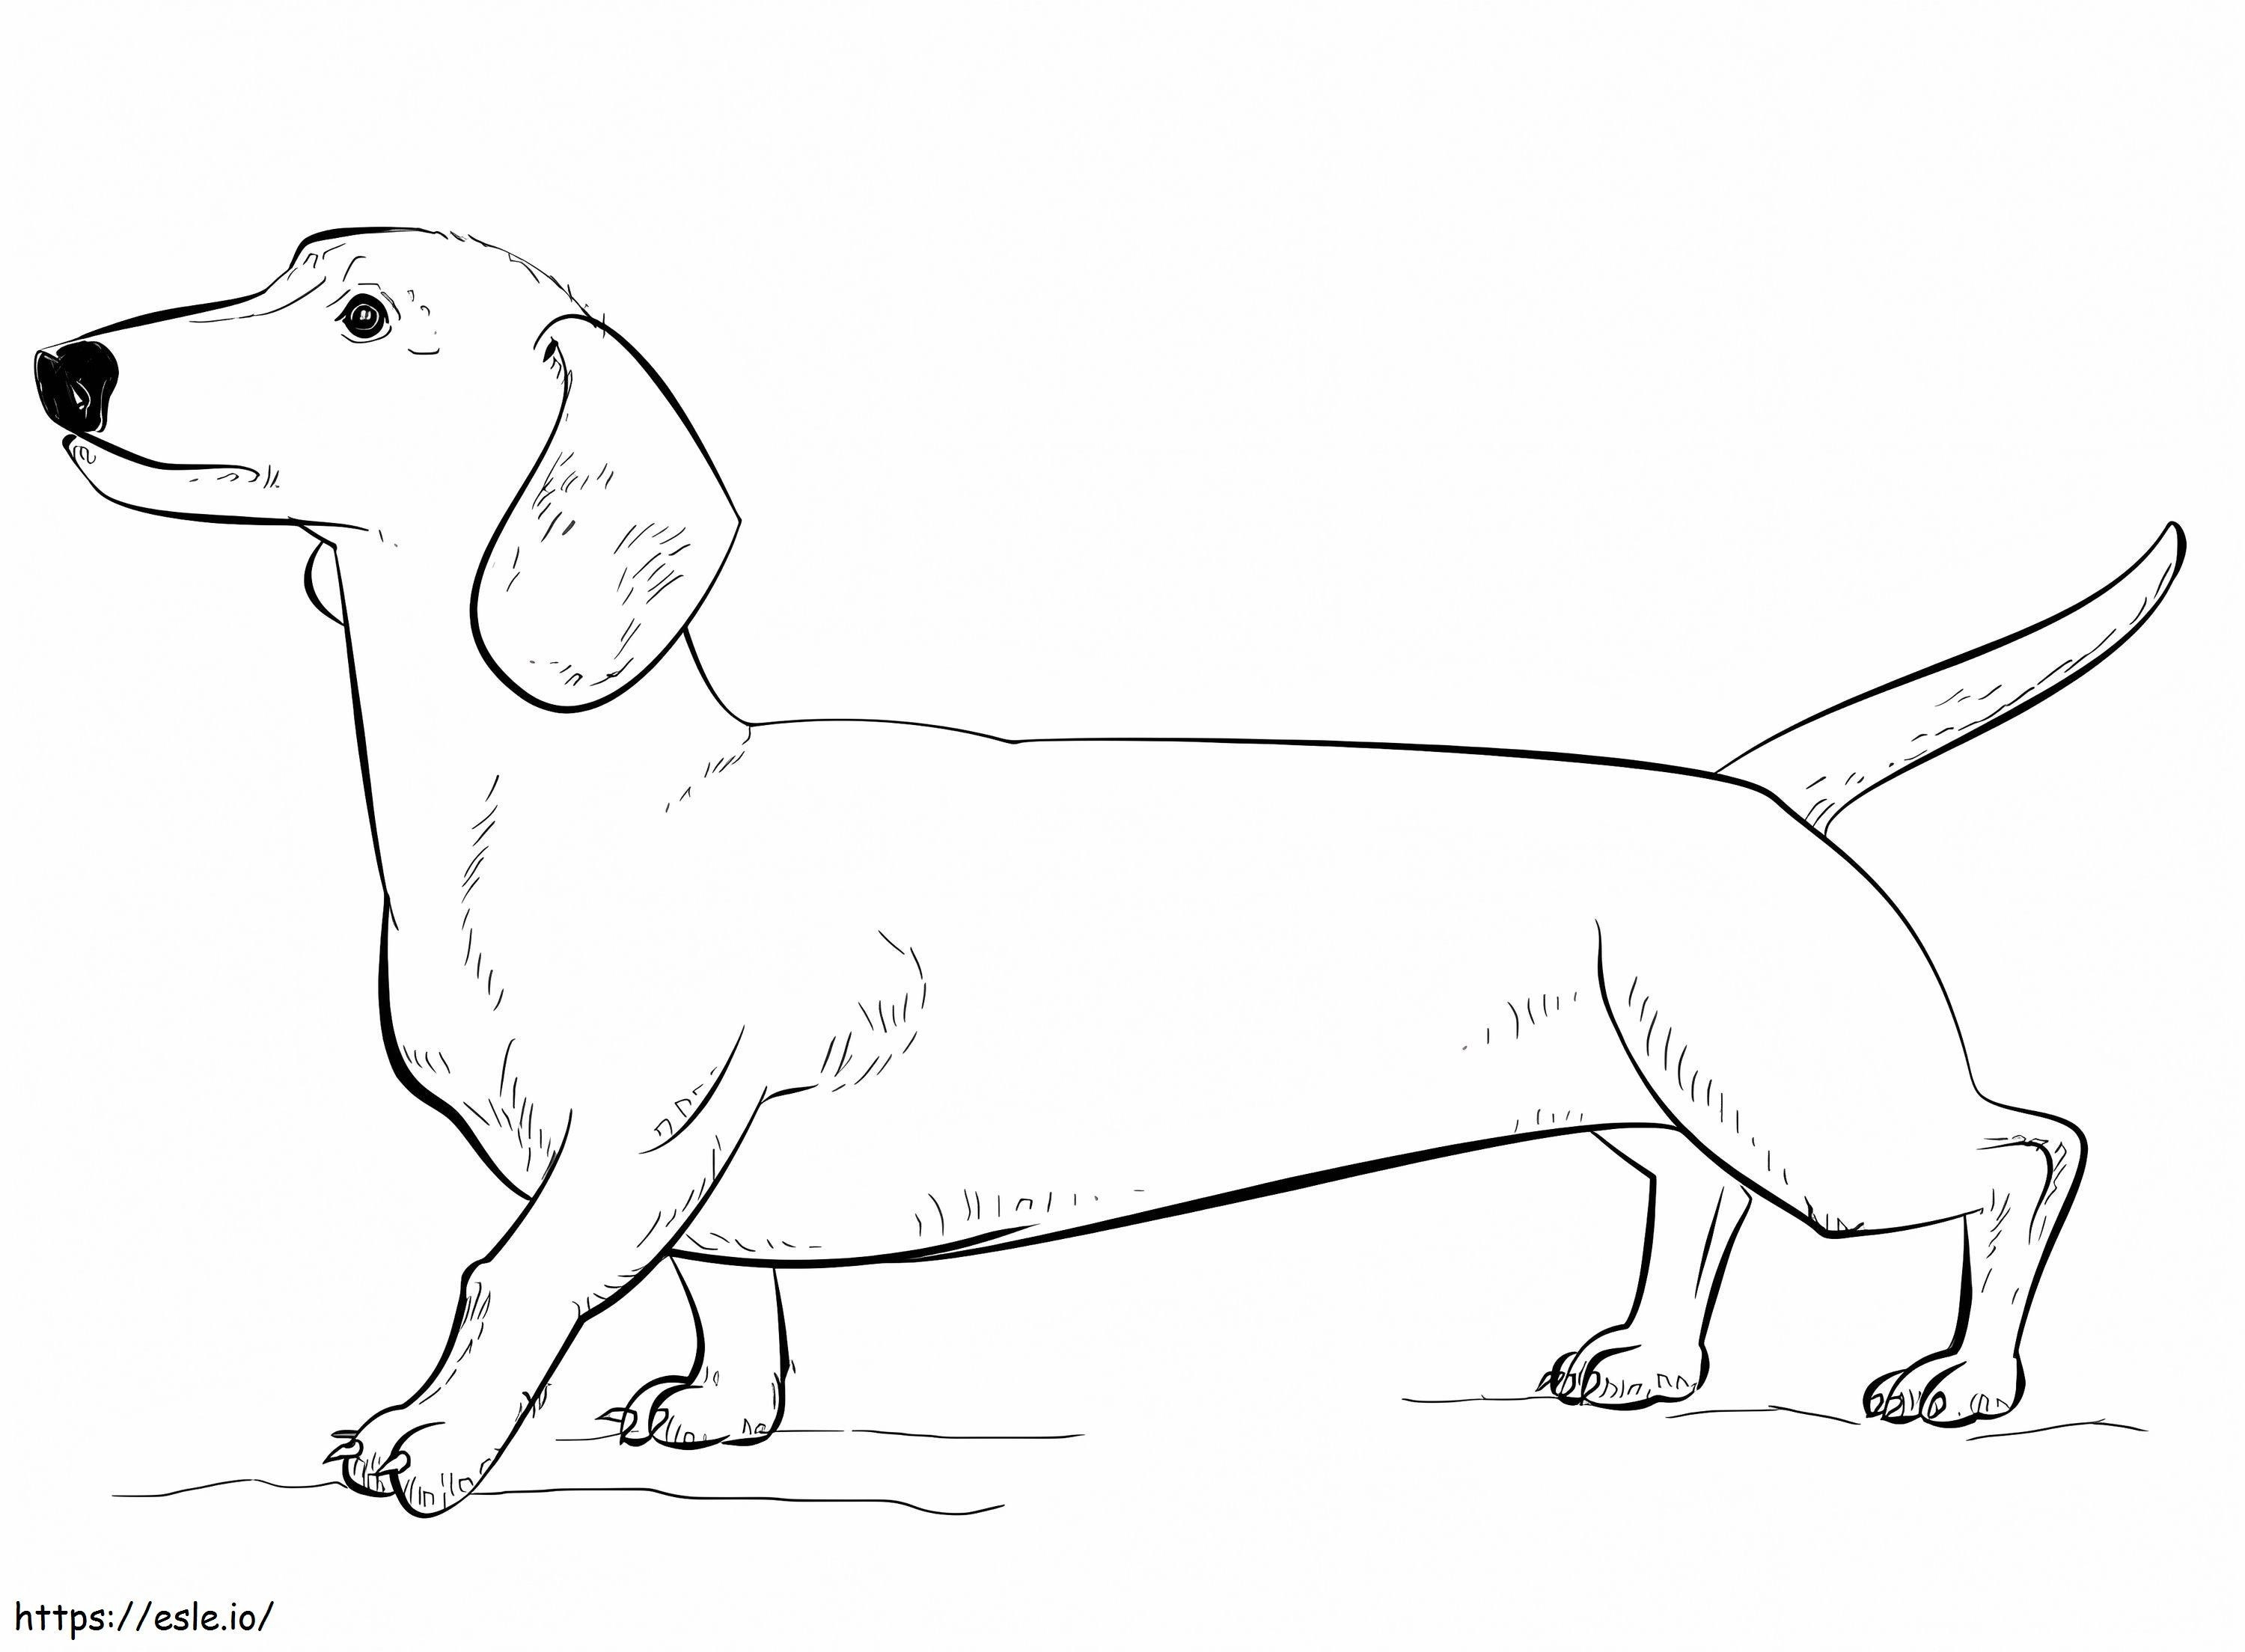 Dachshund Dog coloring page